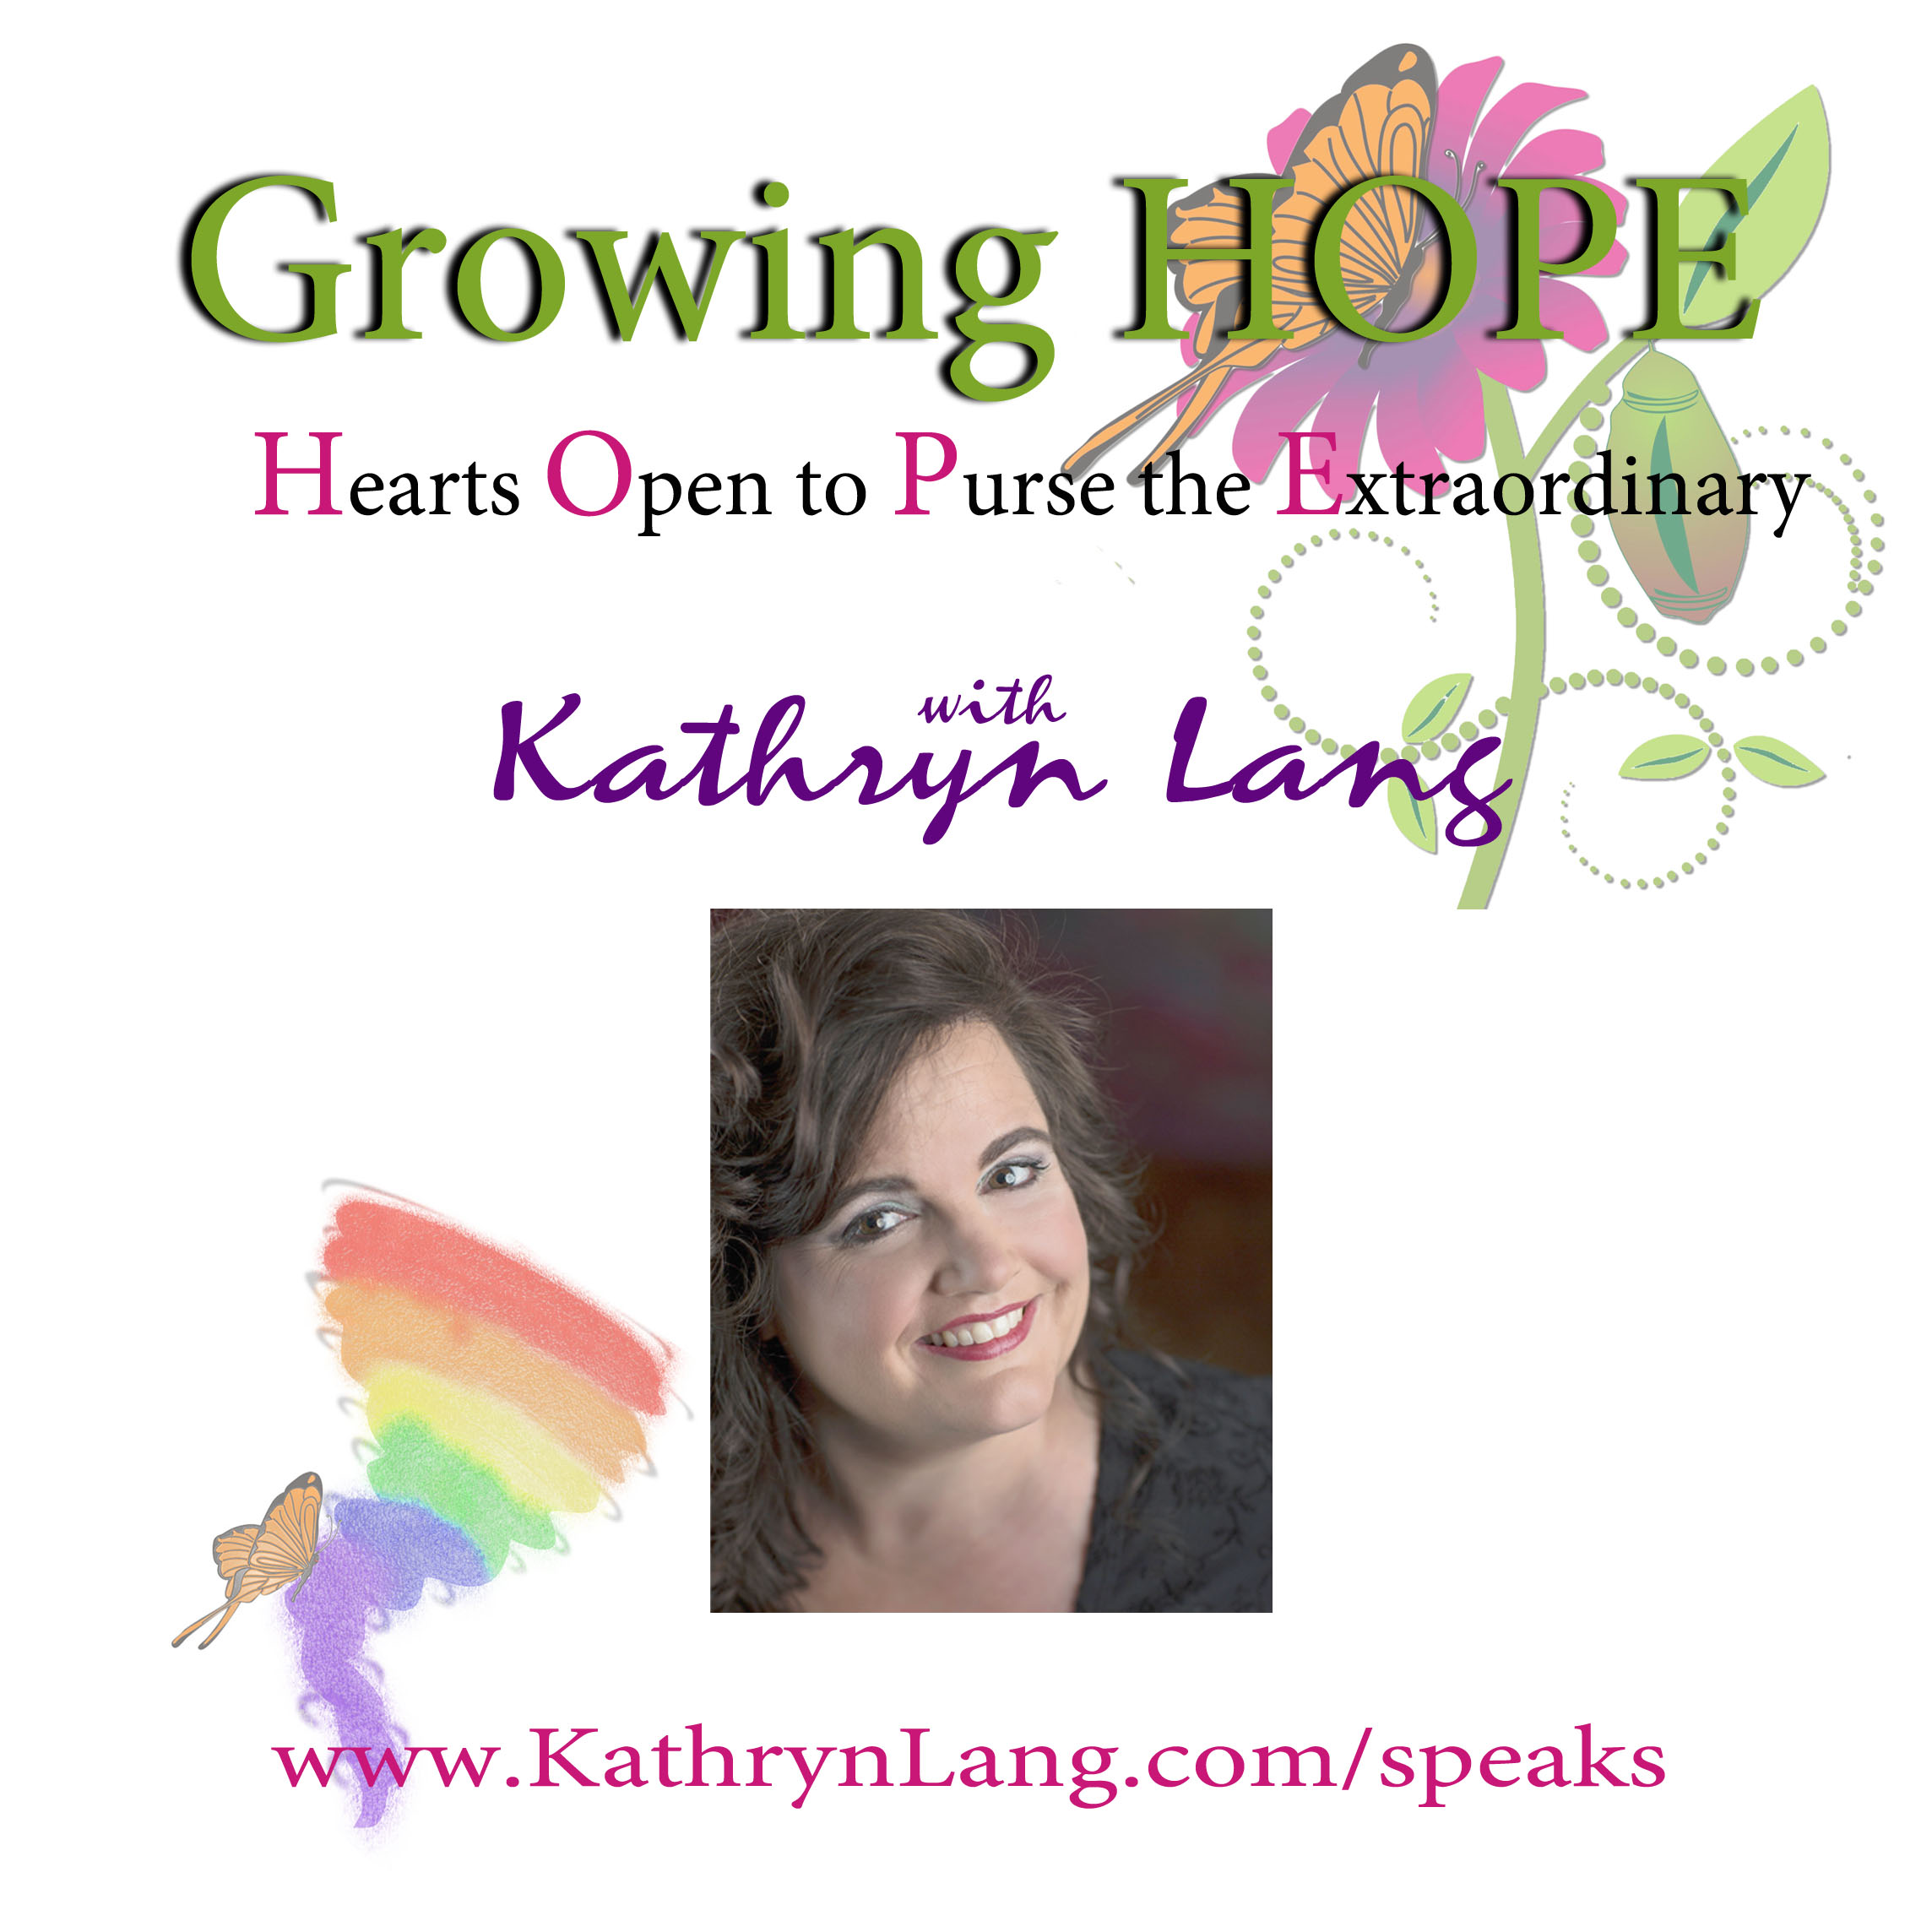 Growing HOPE with Kathryn Lang